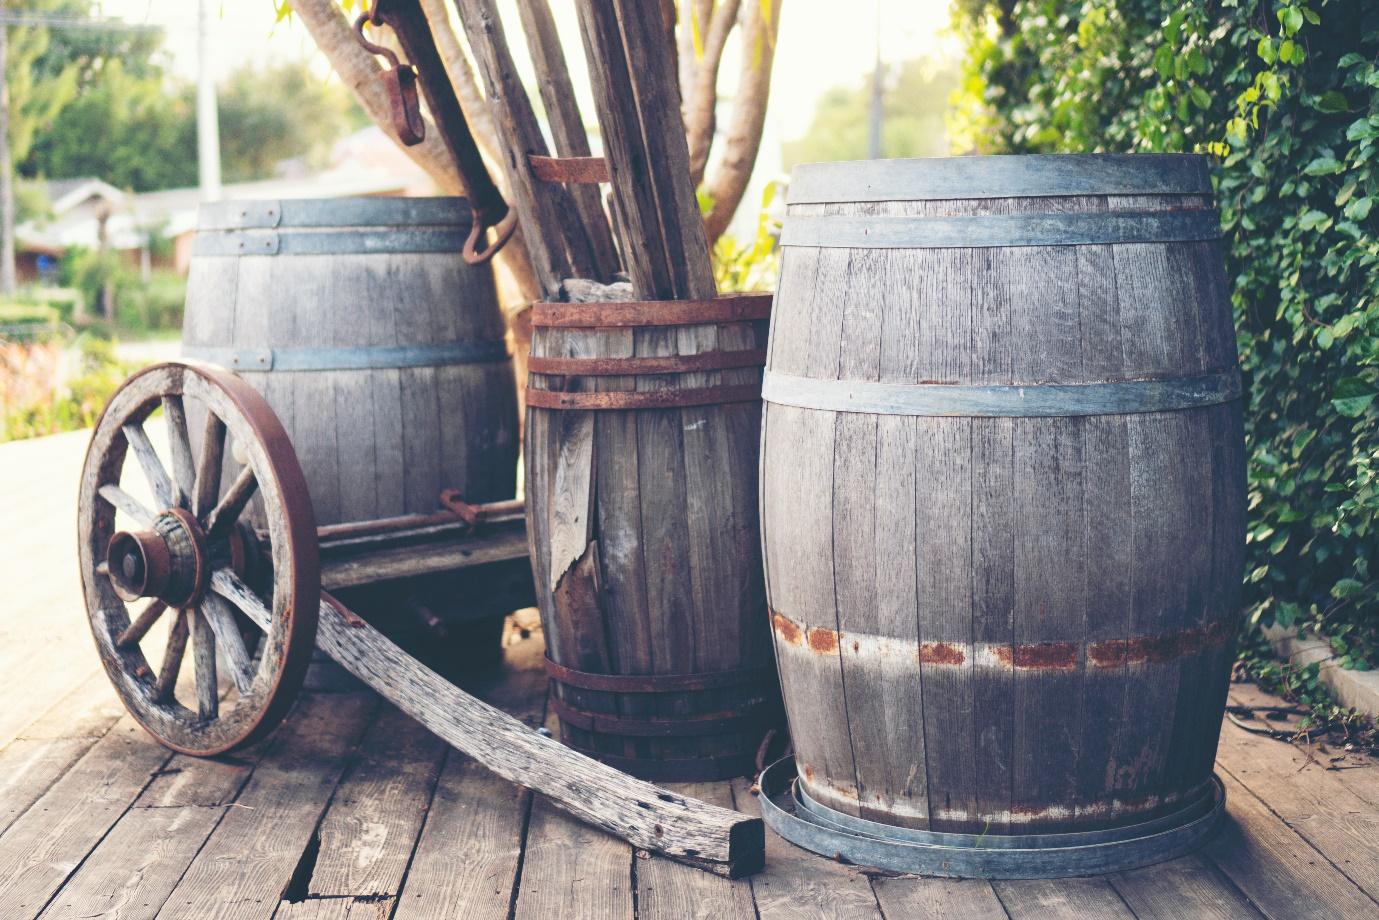  American whiskey brands and whiskey barrels